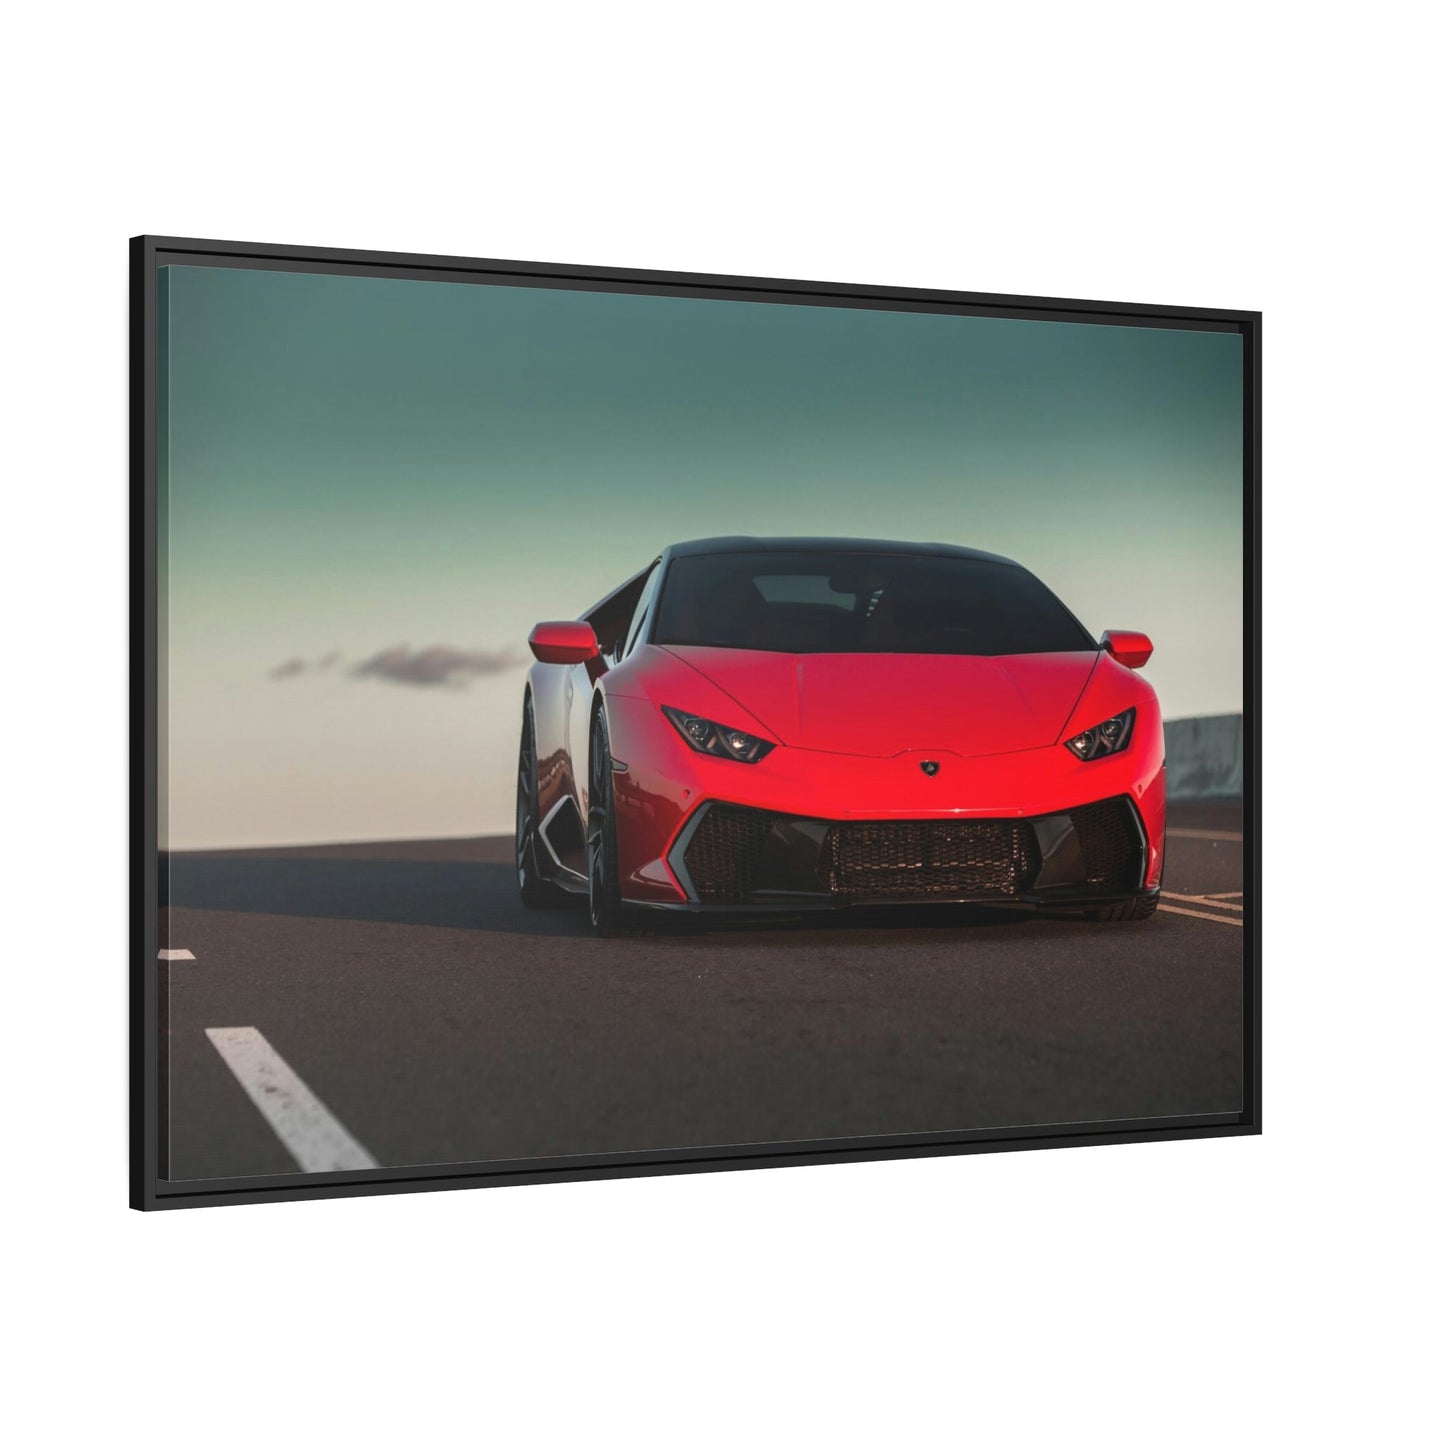 The Epitome of Style: Framed Canvas & Posters Print of a Lamborghini Supercar